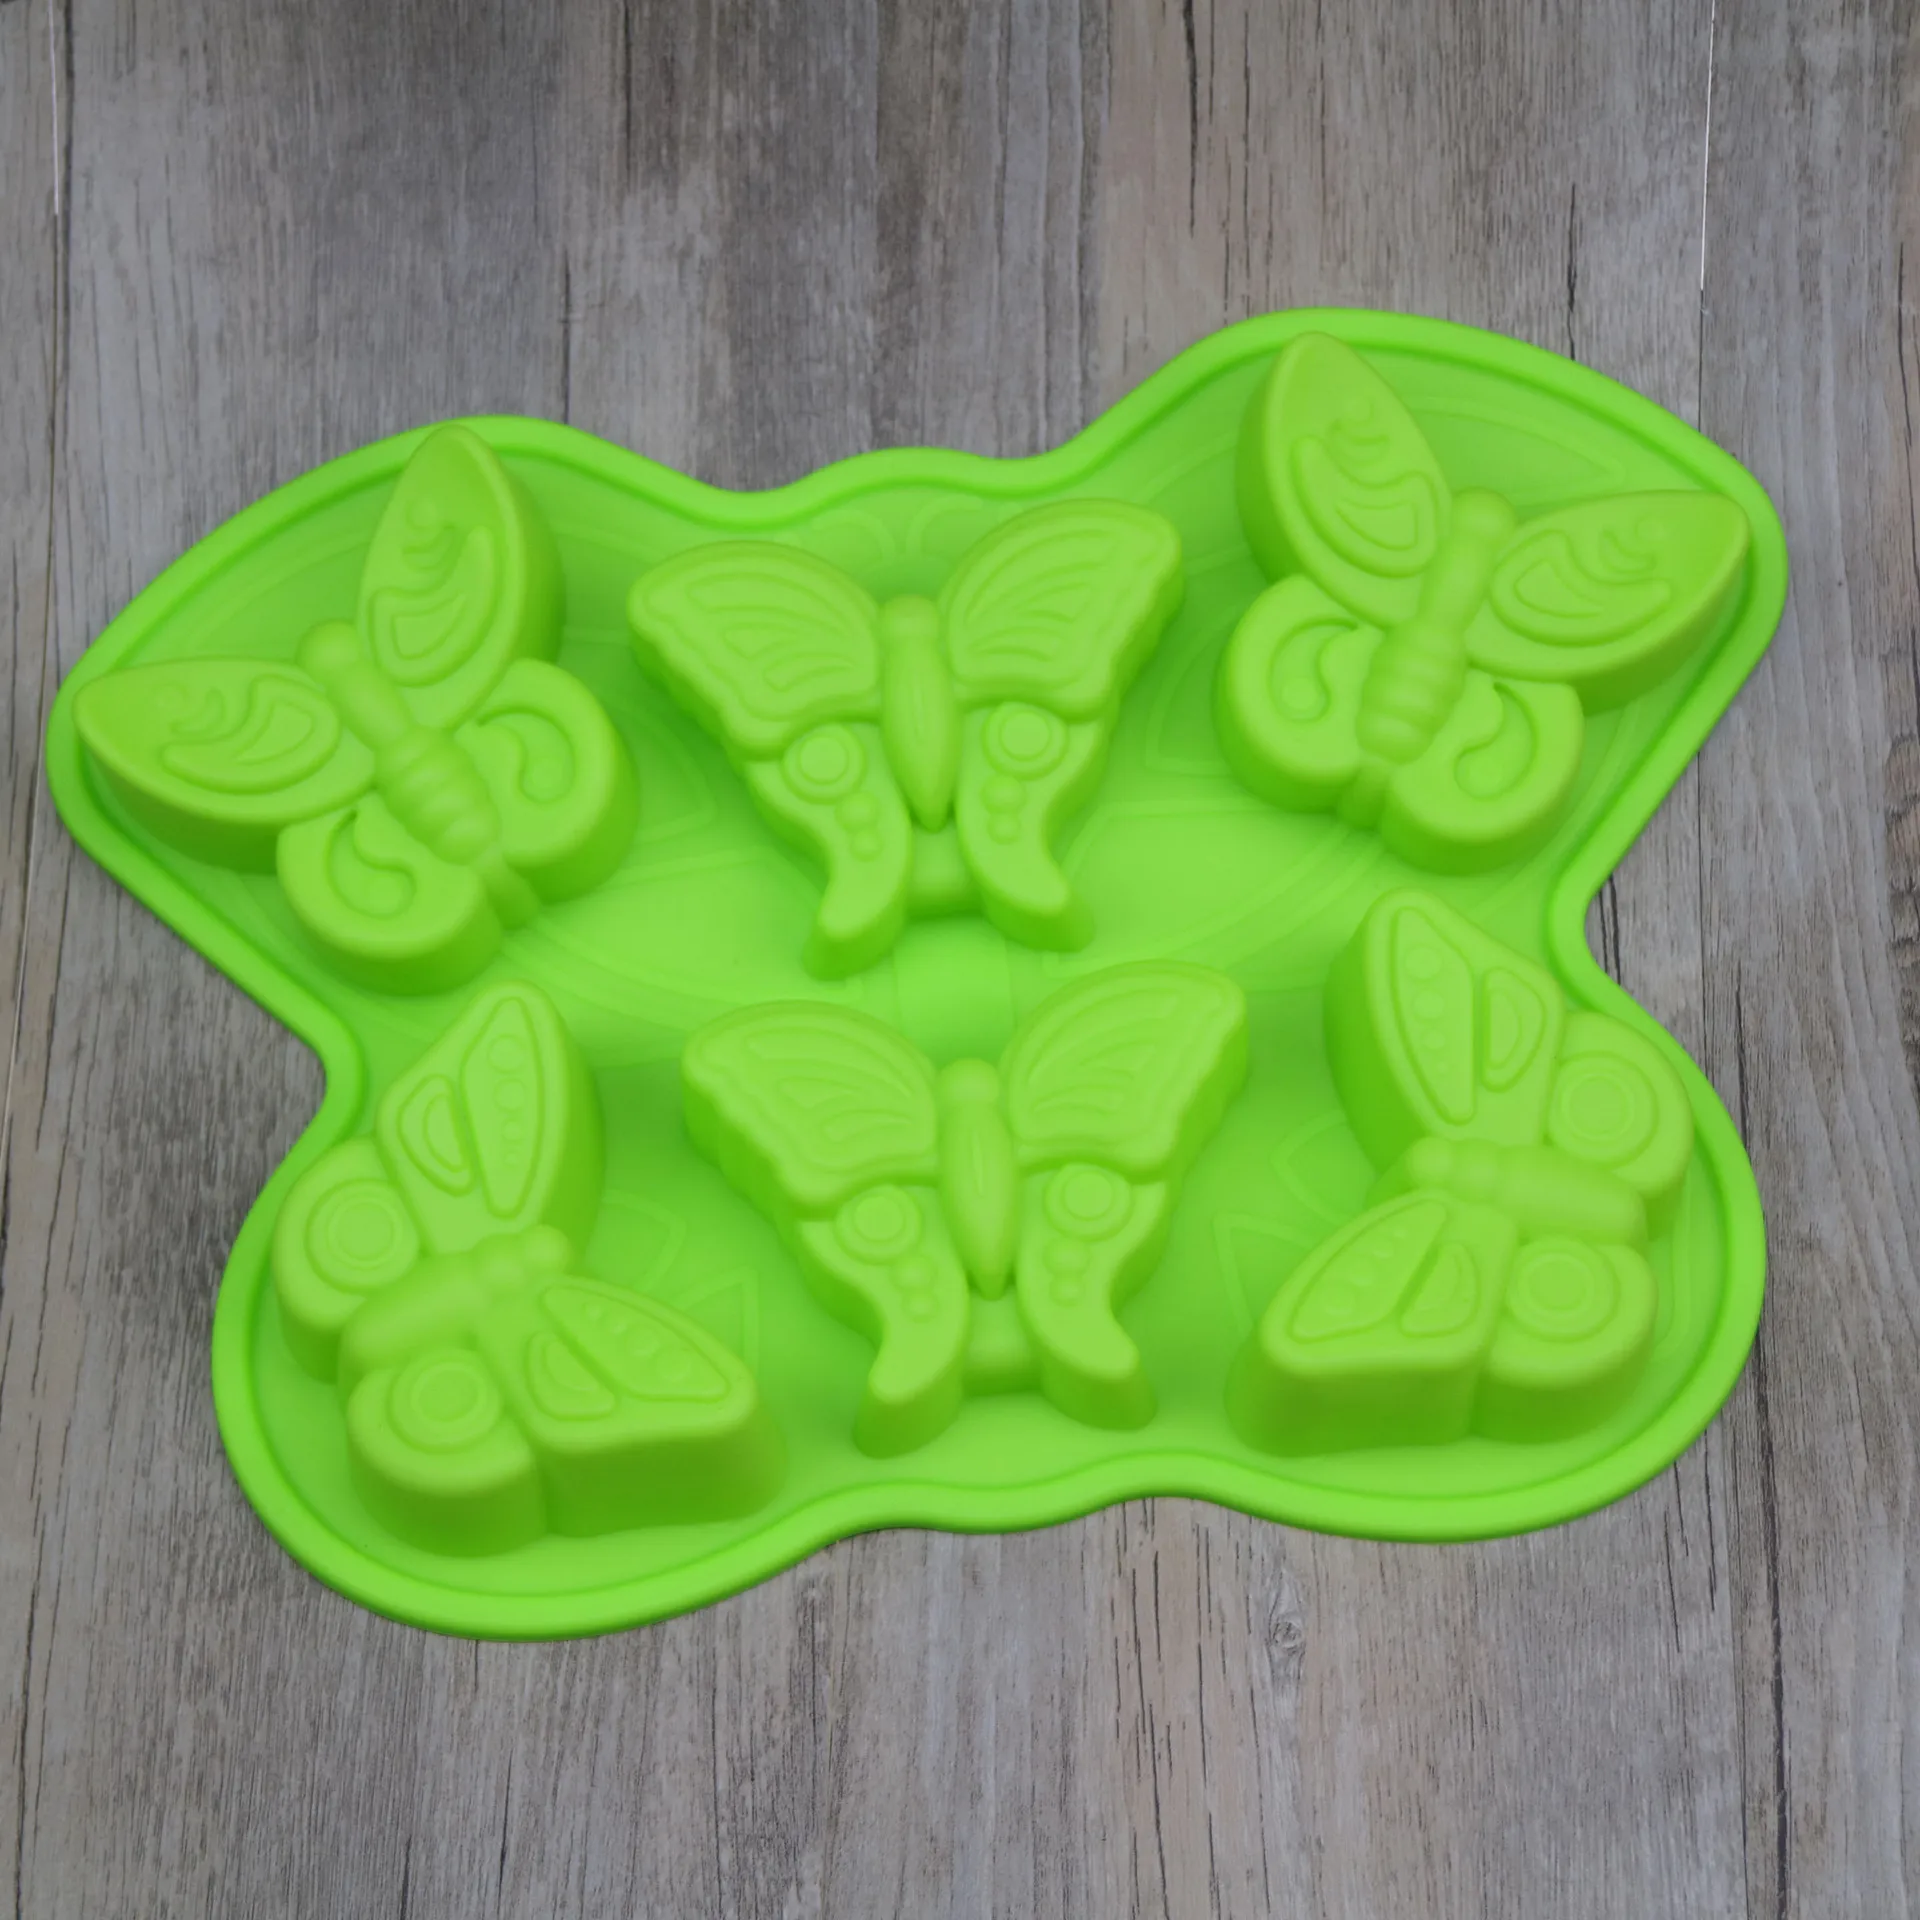 4-Butterfly Cake Mold Soap Mold Silicone Mould For Candy Chocolate Q 